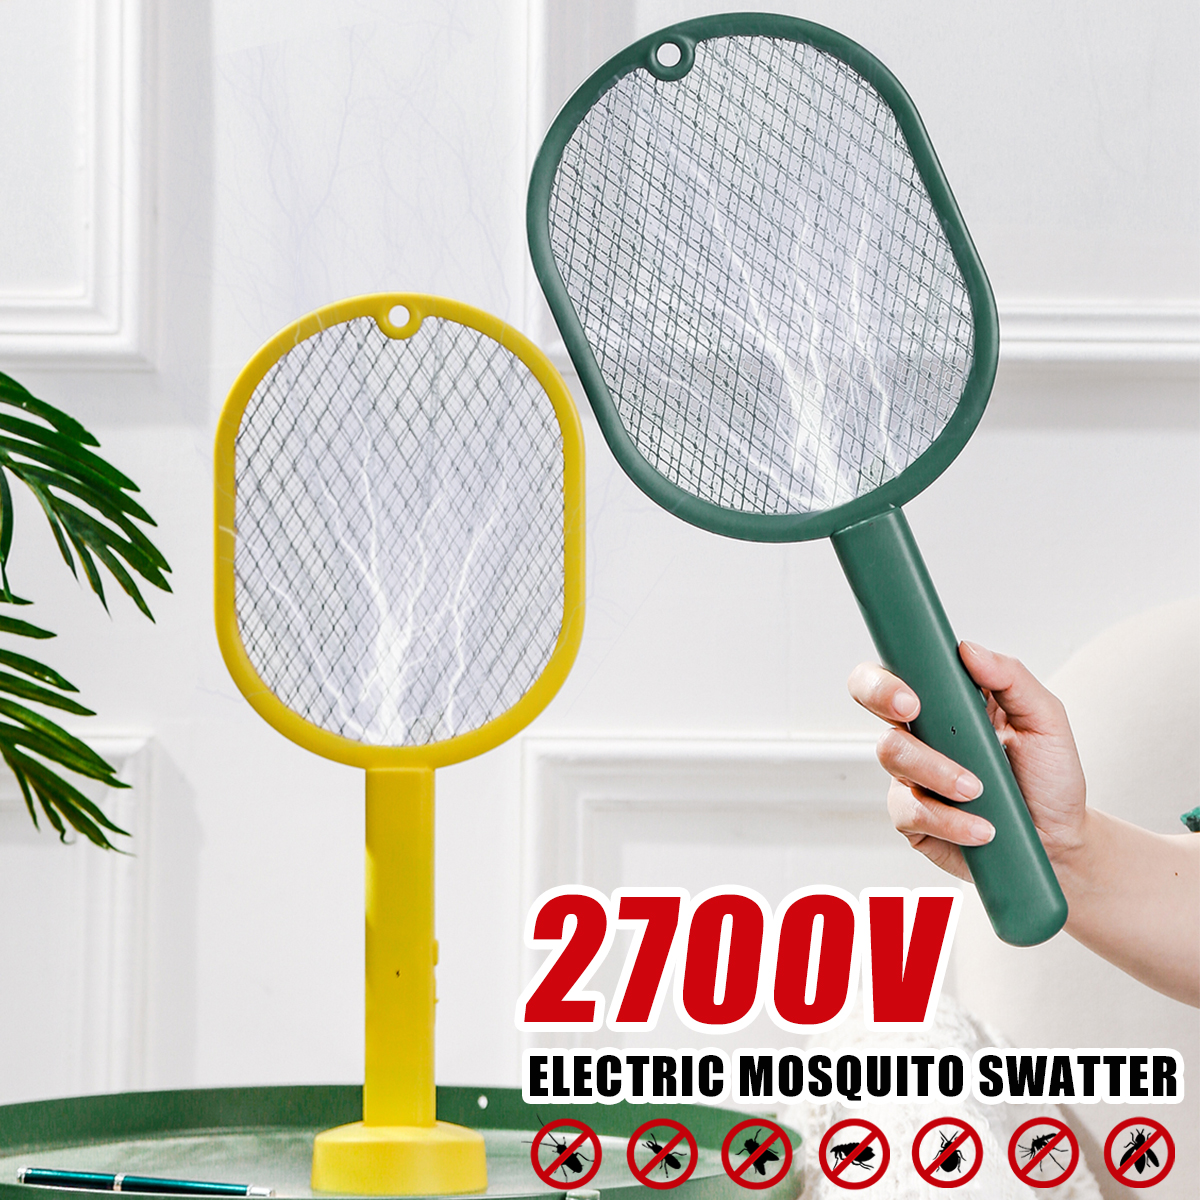 2700V-Electric-Mosquito-Swatter-Night-Light-Dual-Mode-Built-in-450mAh-Battery-USB-Rechargeable-Outdo-1871986-1